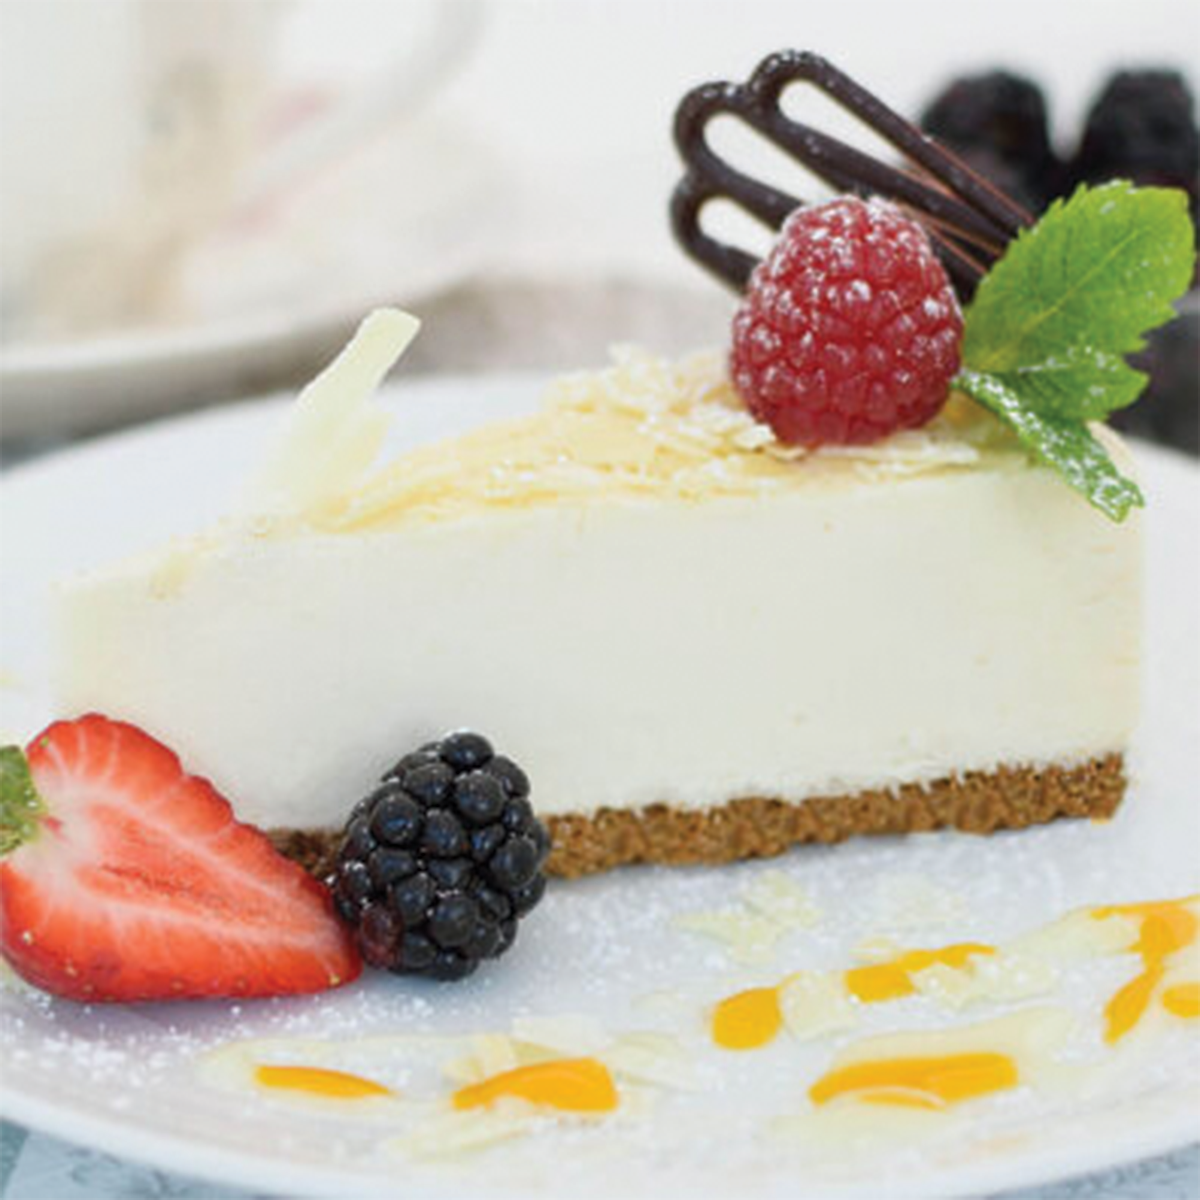 Coolhul White Chocolate Cheesecake 14 Slices